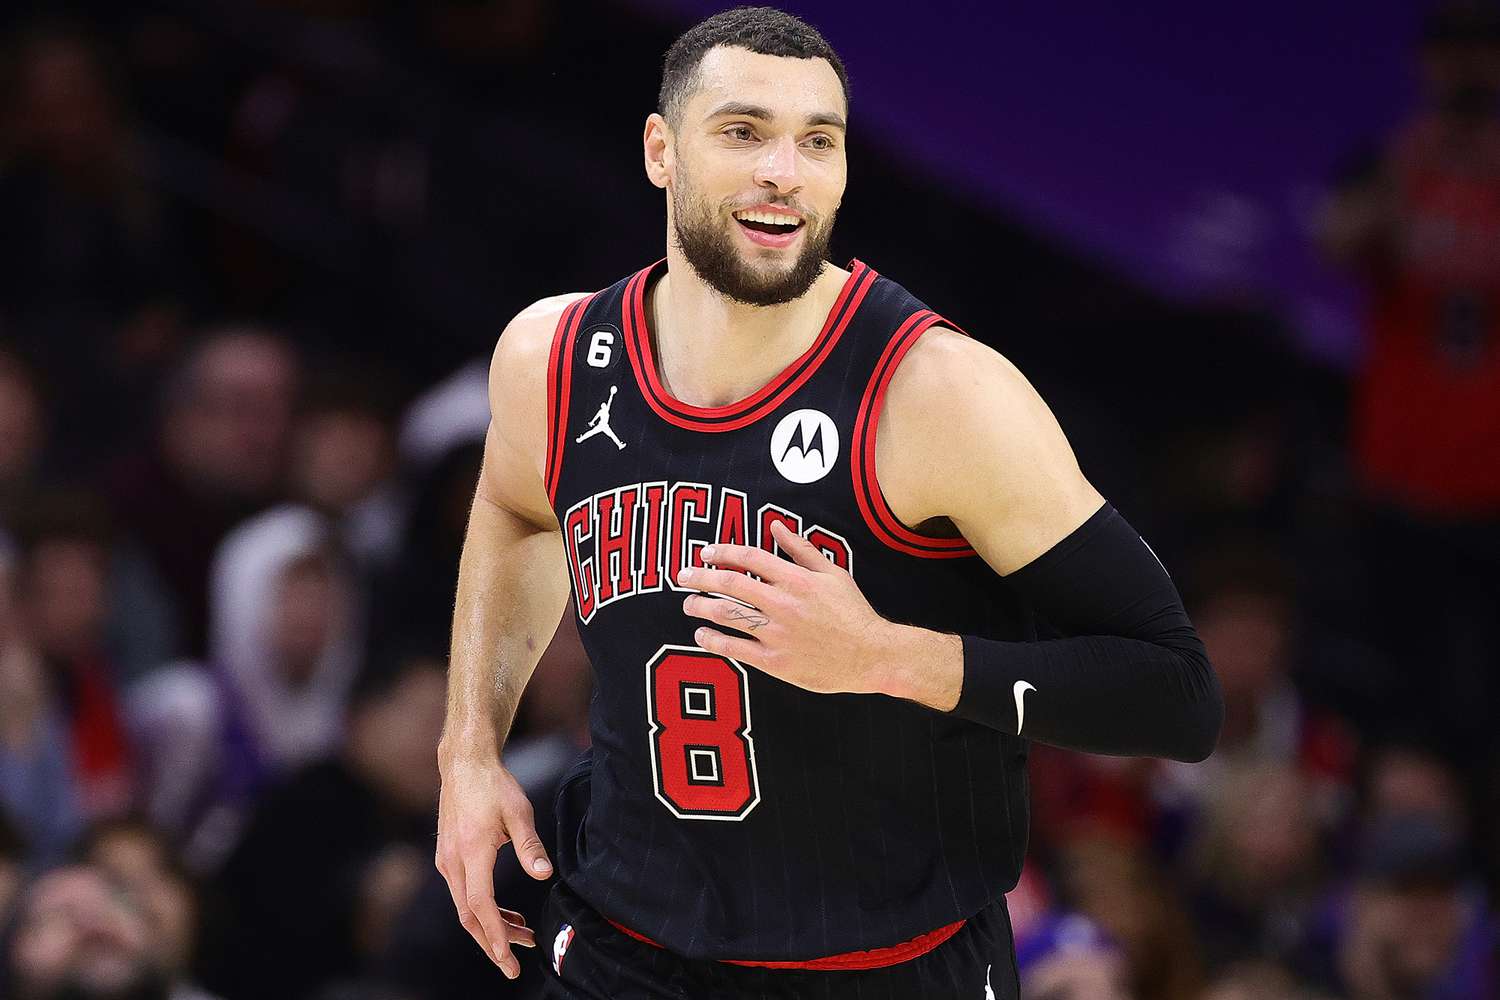 Bulls' Zach LaVine Remains in Chicago as Heat Reportedly Back Off Trade Talks